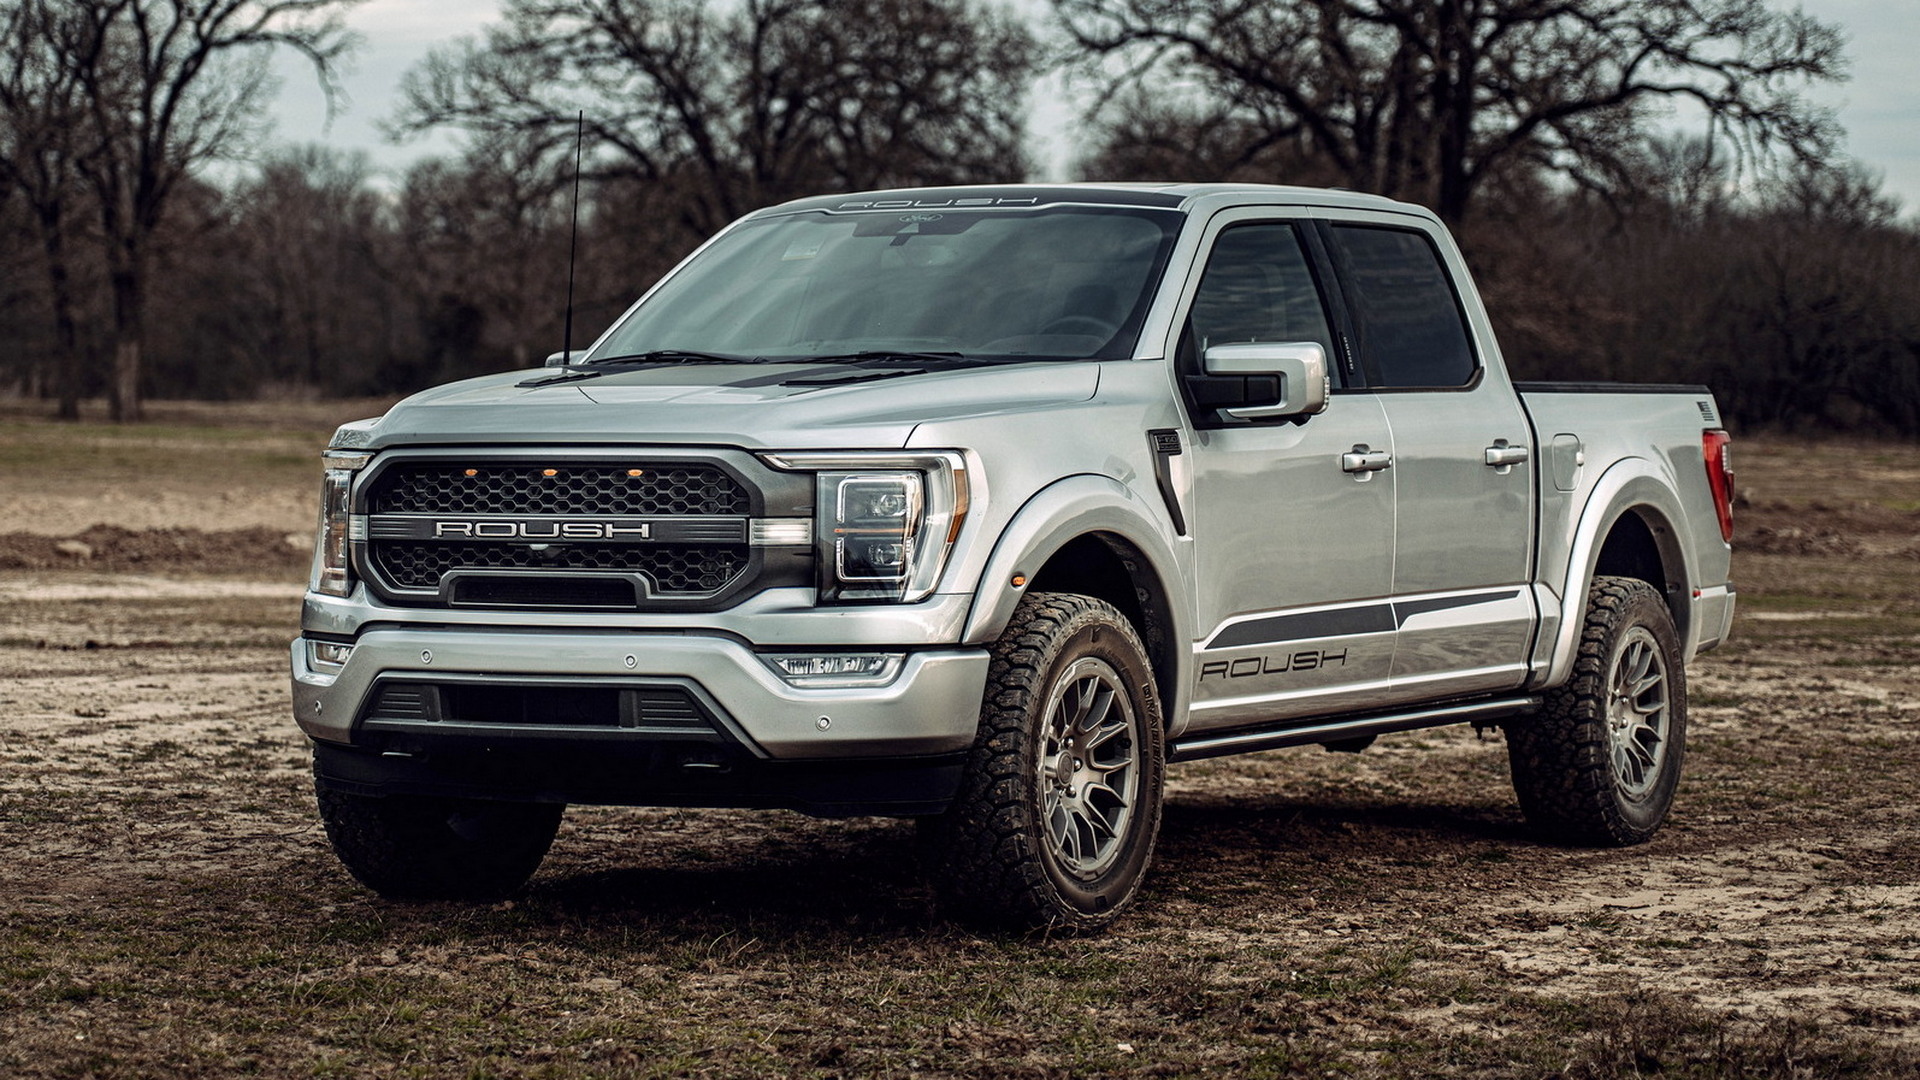 Roush Unleashes Supercharger Kit Giving Raptor R Power To Late Model F-150s